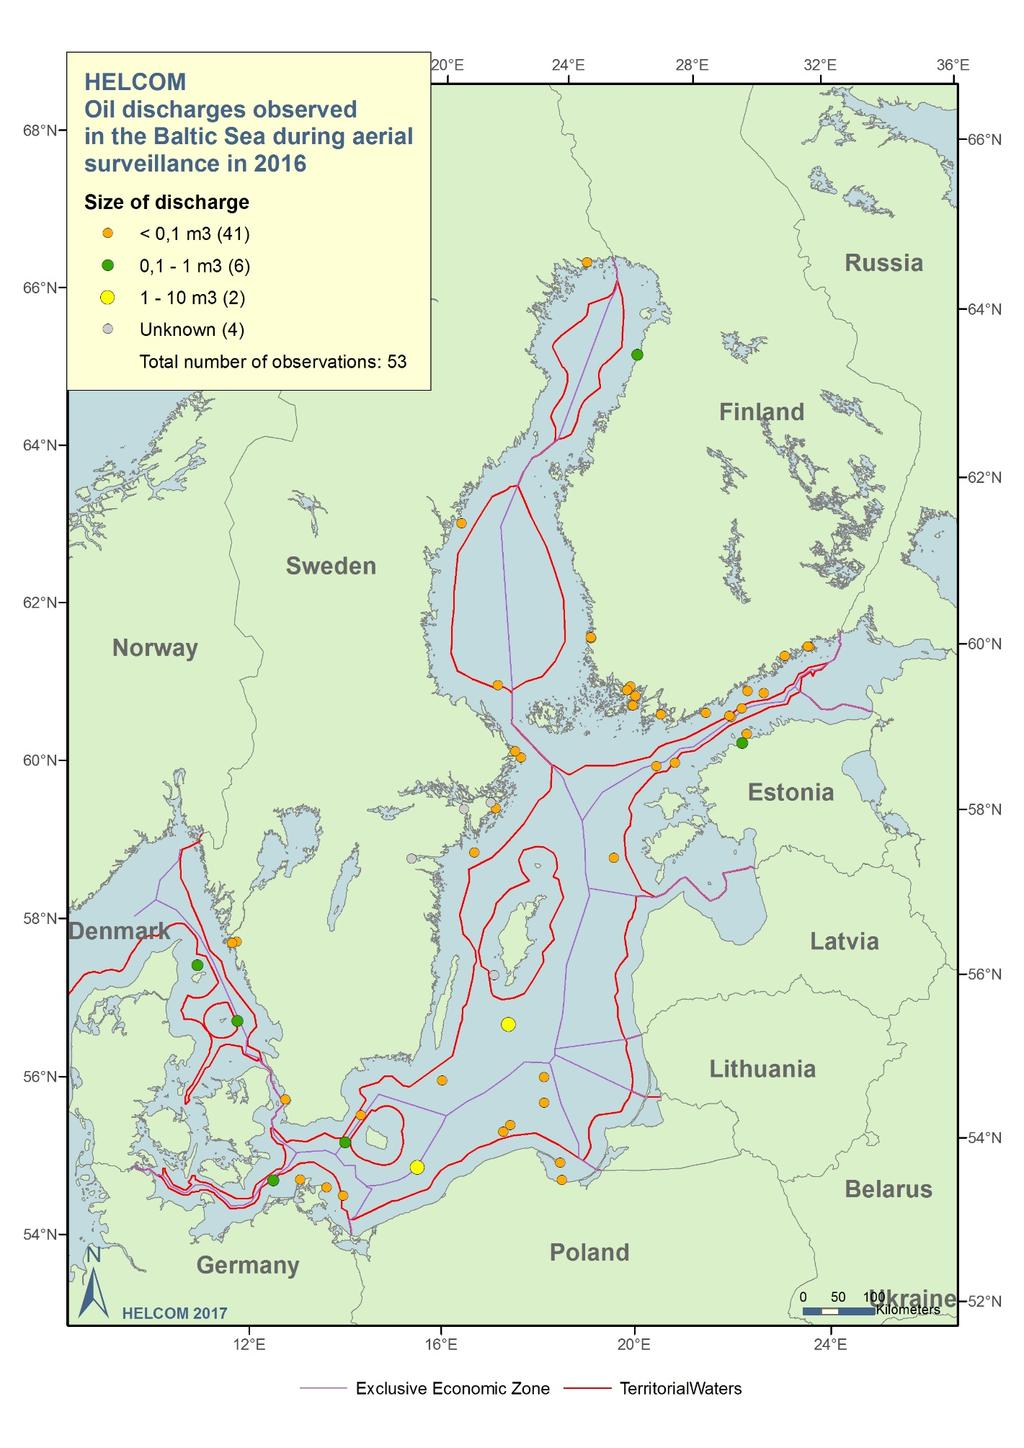 Figure 9 Location of oil spills observed in